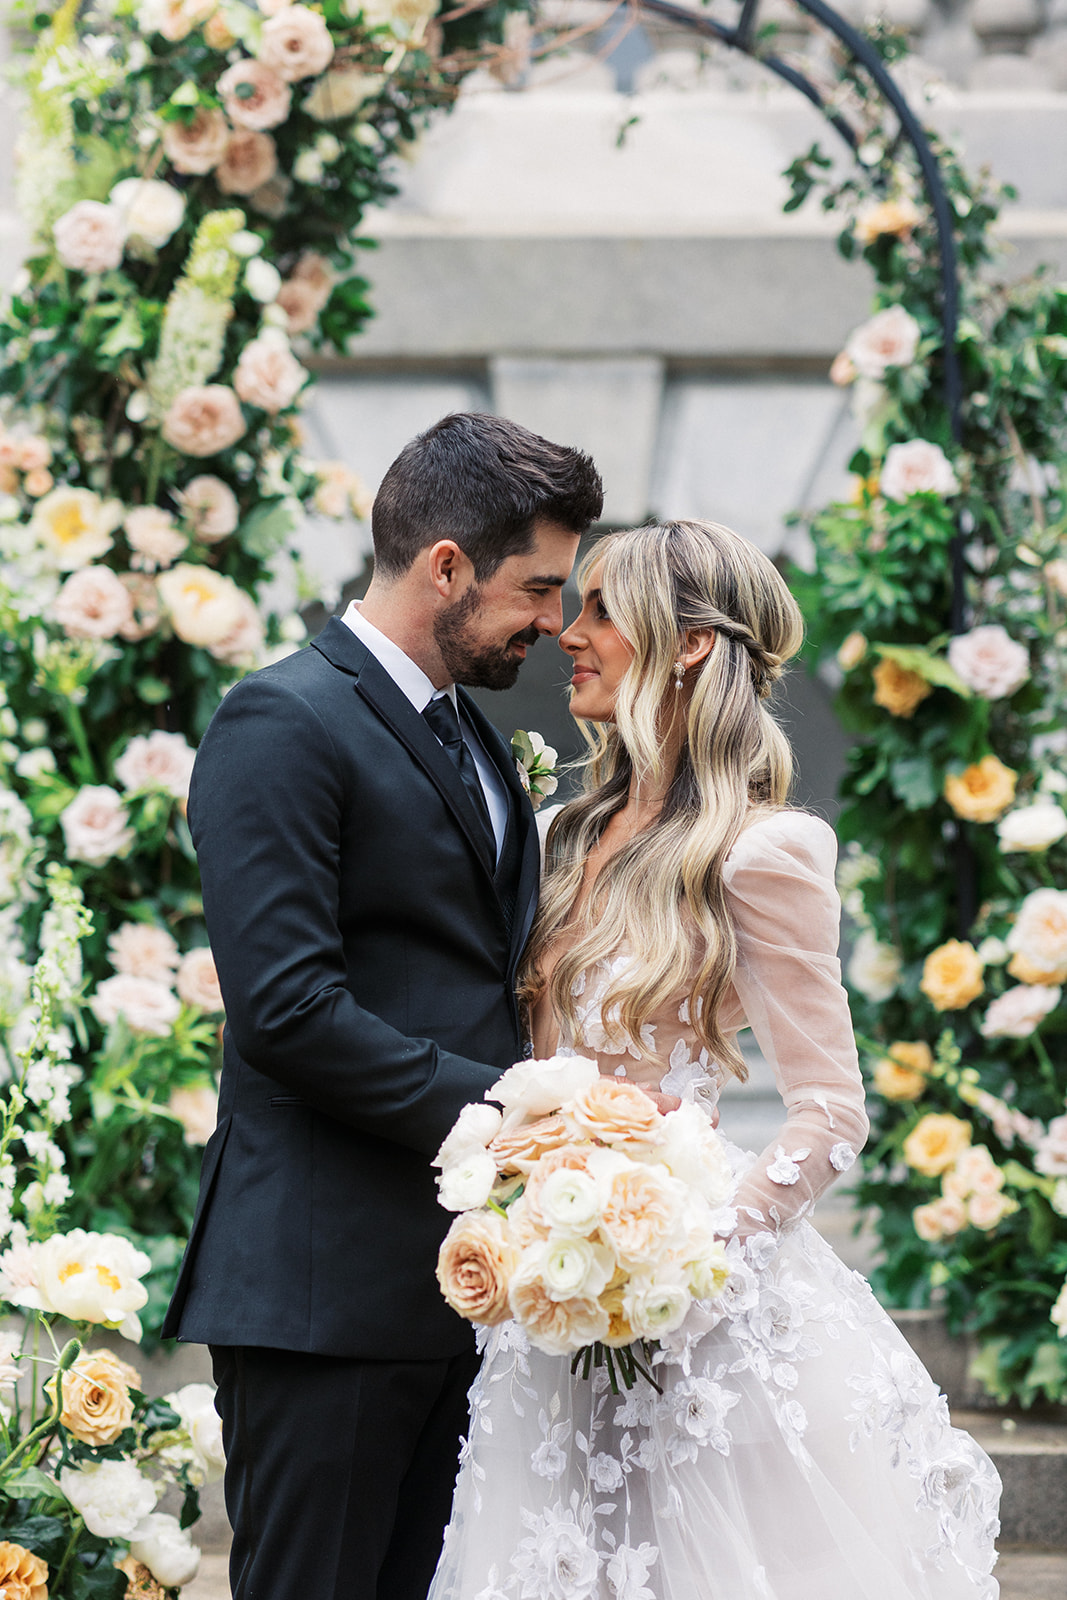 Newlyweds lean in for a kiss under a flower arch of white and pink roses